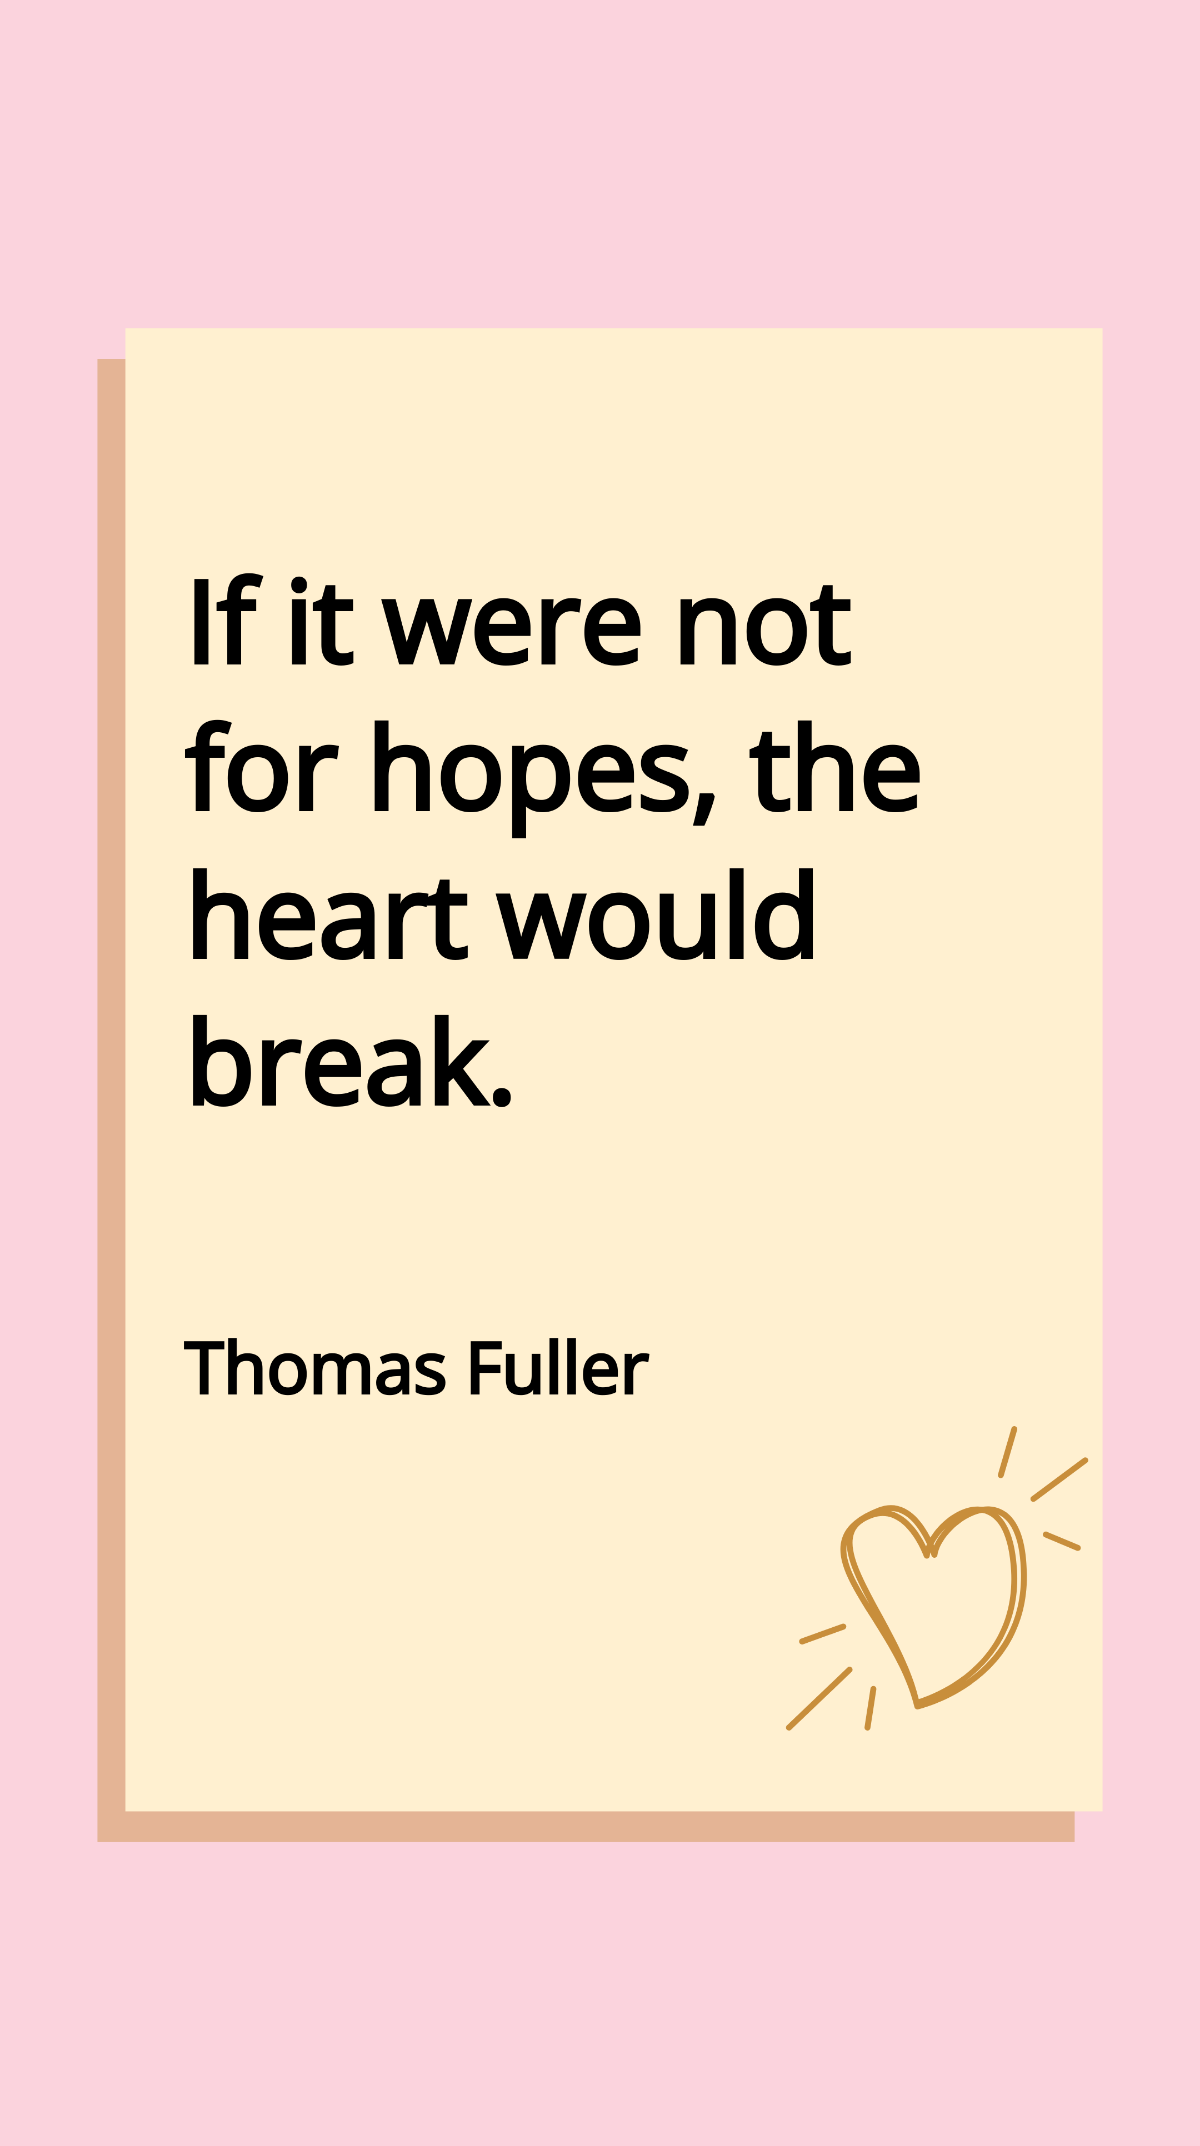 Thomas Fuller - If it were not for hopes, the heart would break. Template